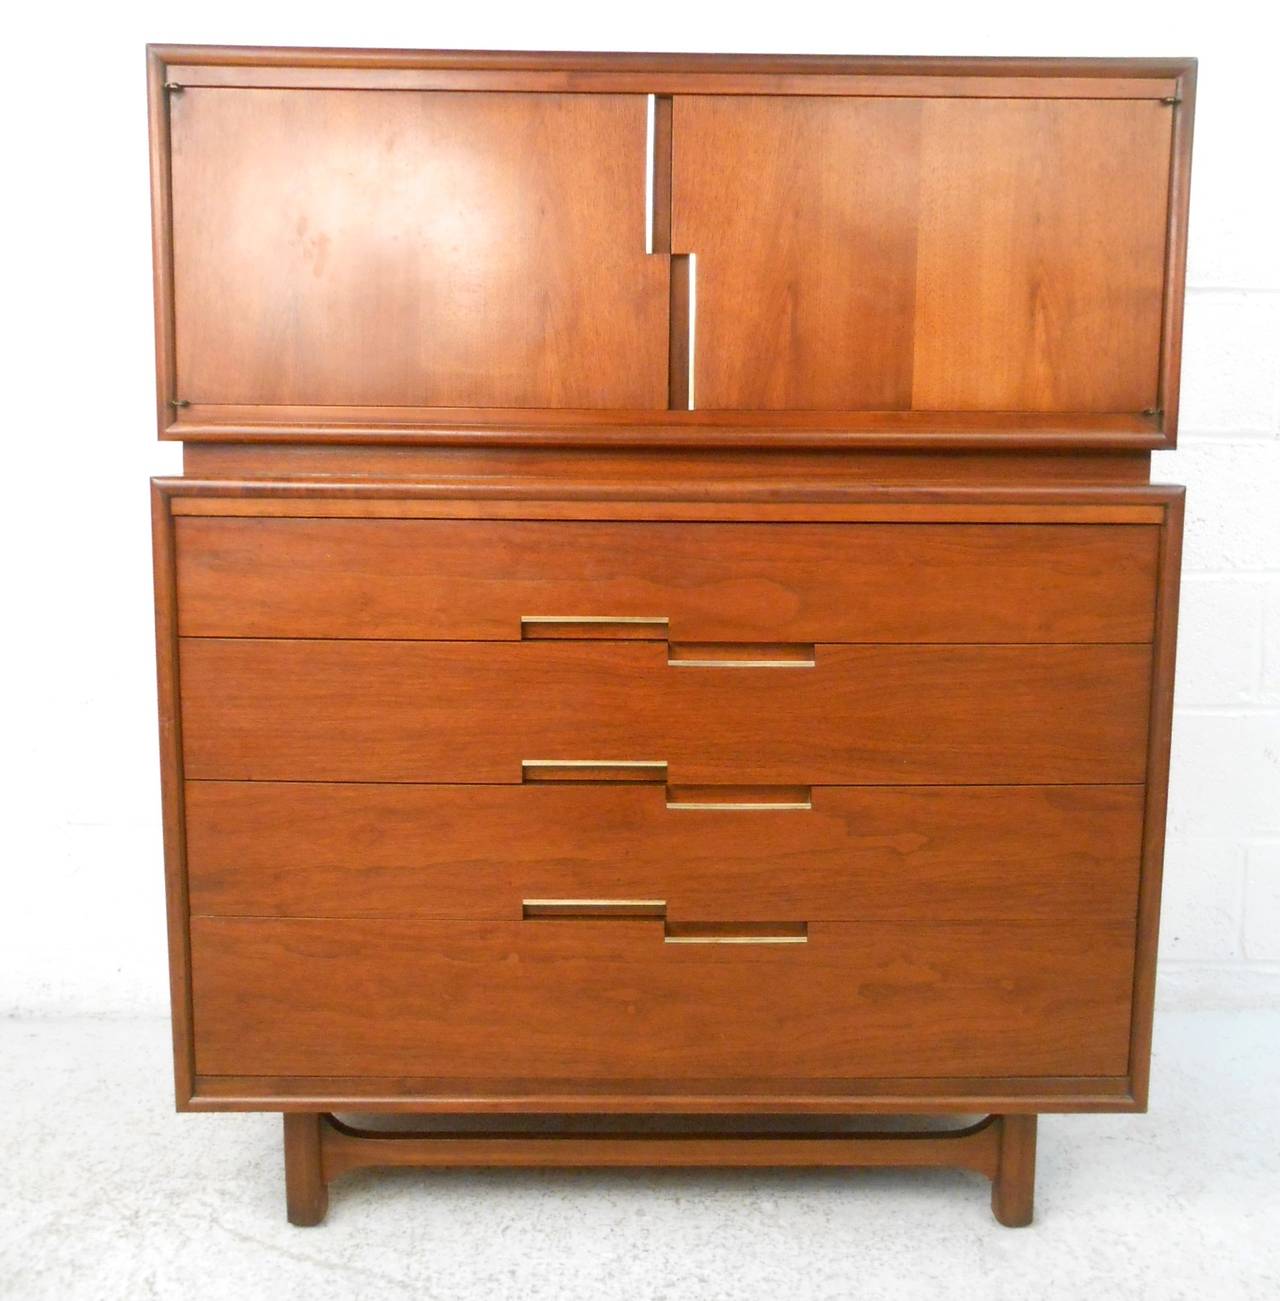 This beautiful American walnut dresser features the stylized pulls Kent Coffey was so well known for, as well as an exquisite selection of veneer. Fitted with added stretchers to increase stability, this piece is marked by manufacturer Cavalier.